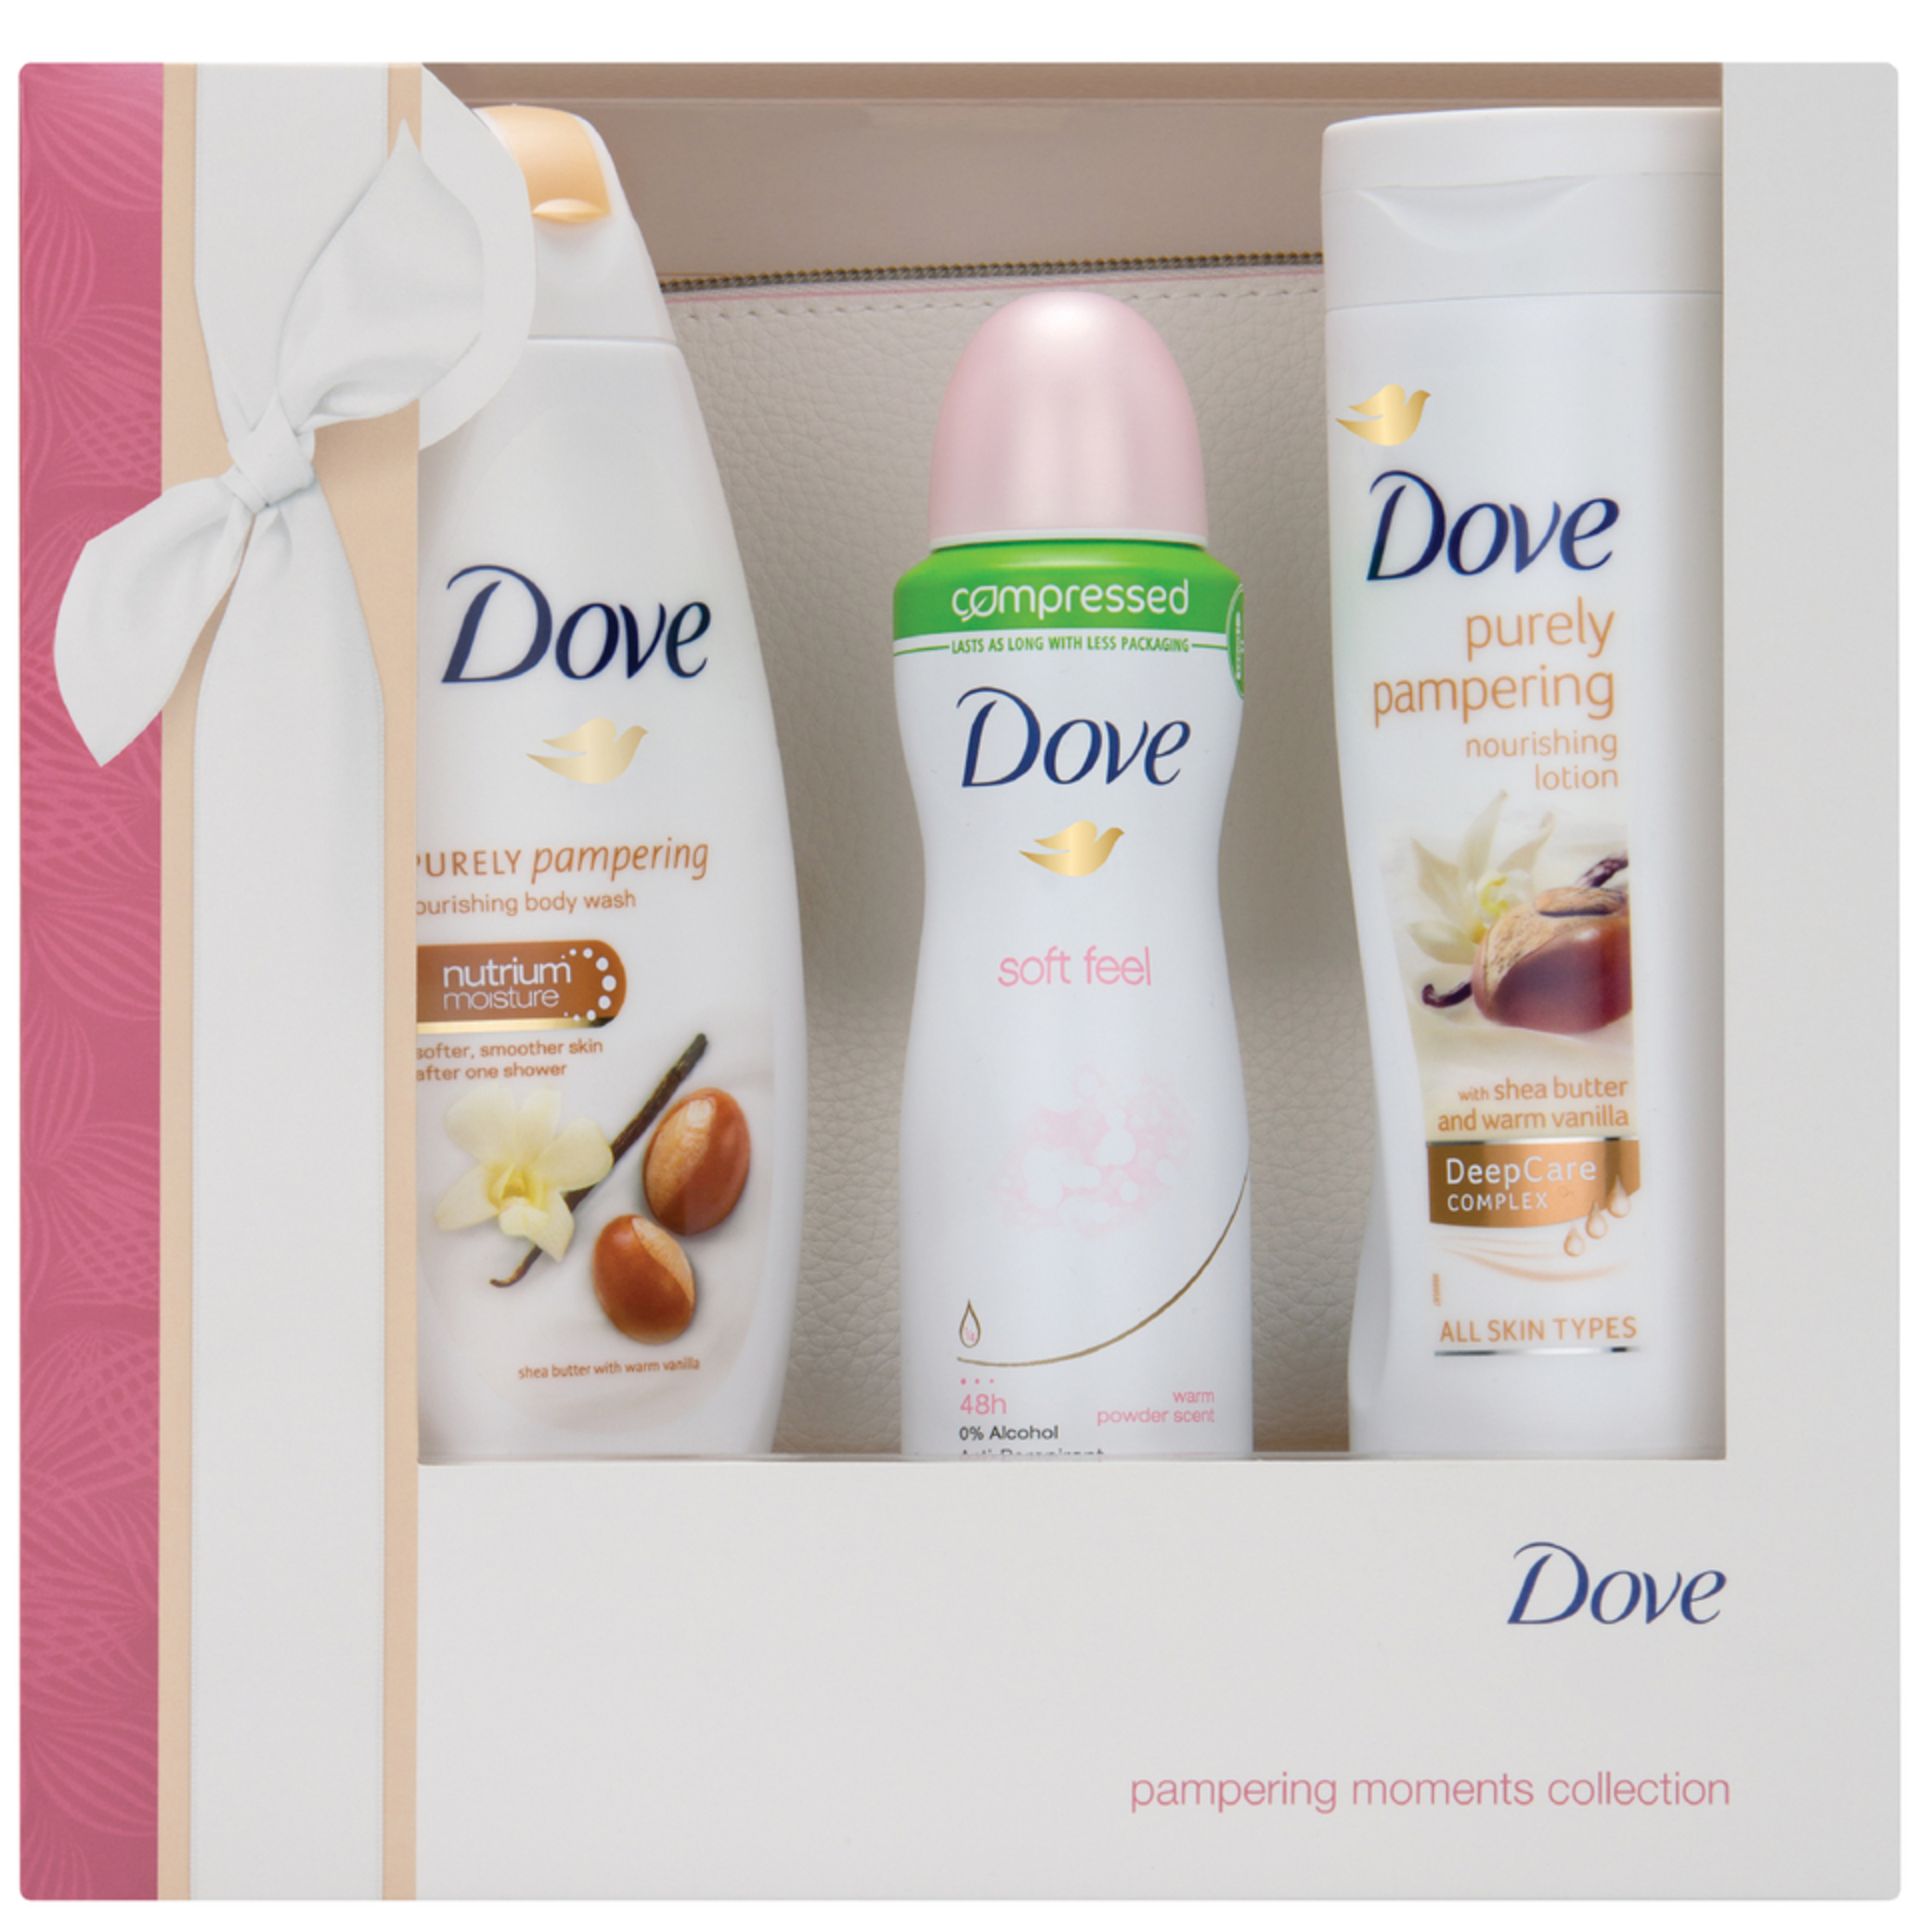 V Brand New Dove Pampering Moments Trio & Washbag Set Includes 3 Full-Size Dove Products